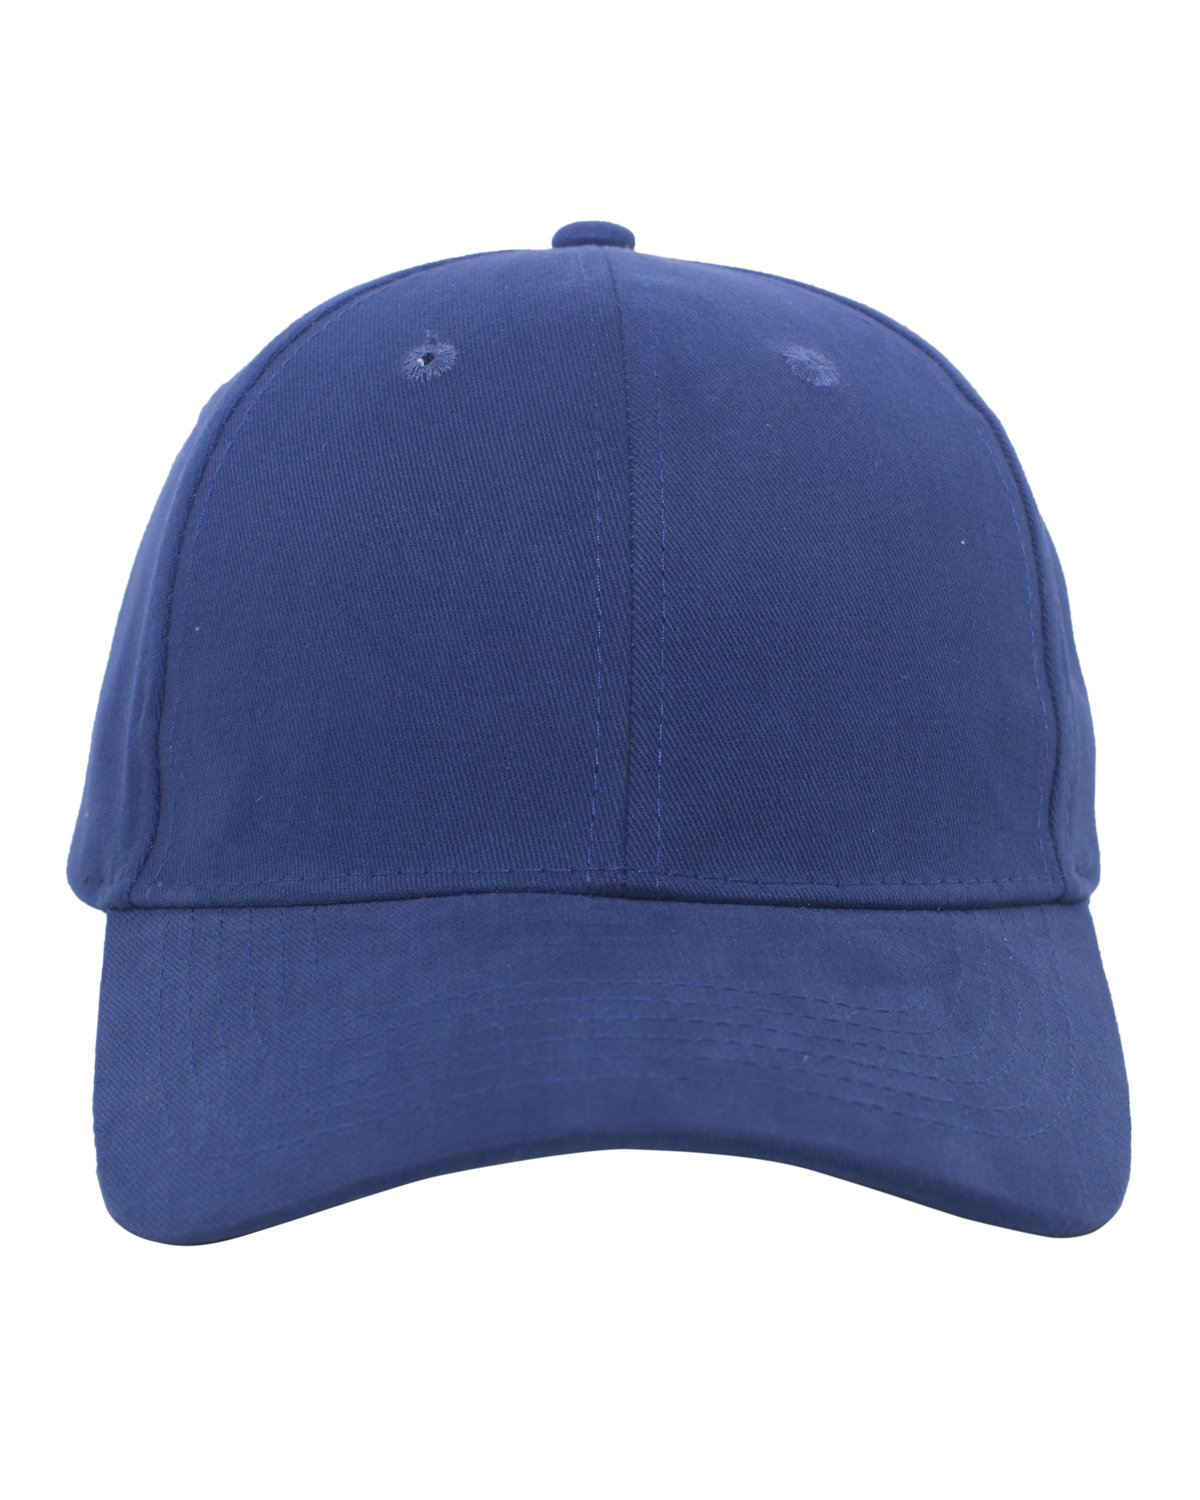 Brushed Cotton Twill Adjustable Cap-Pacific Headwear